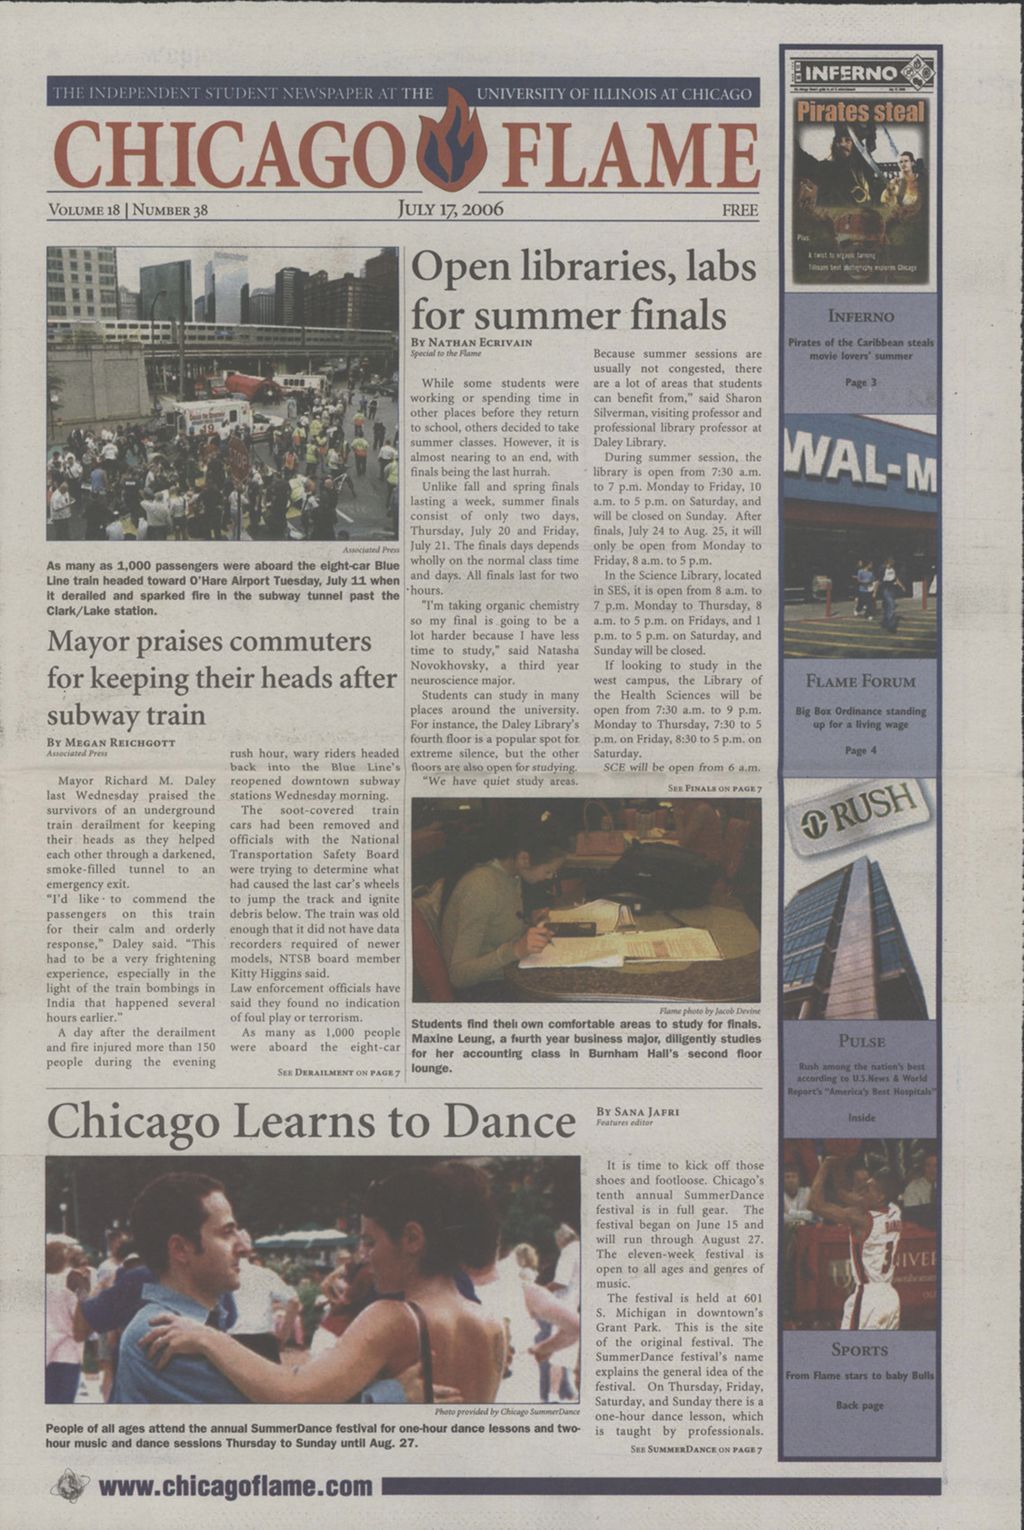 Miniature of Chicago Flame (July 17, 2006)